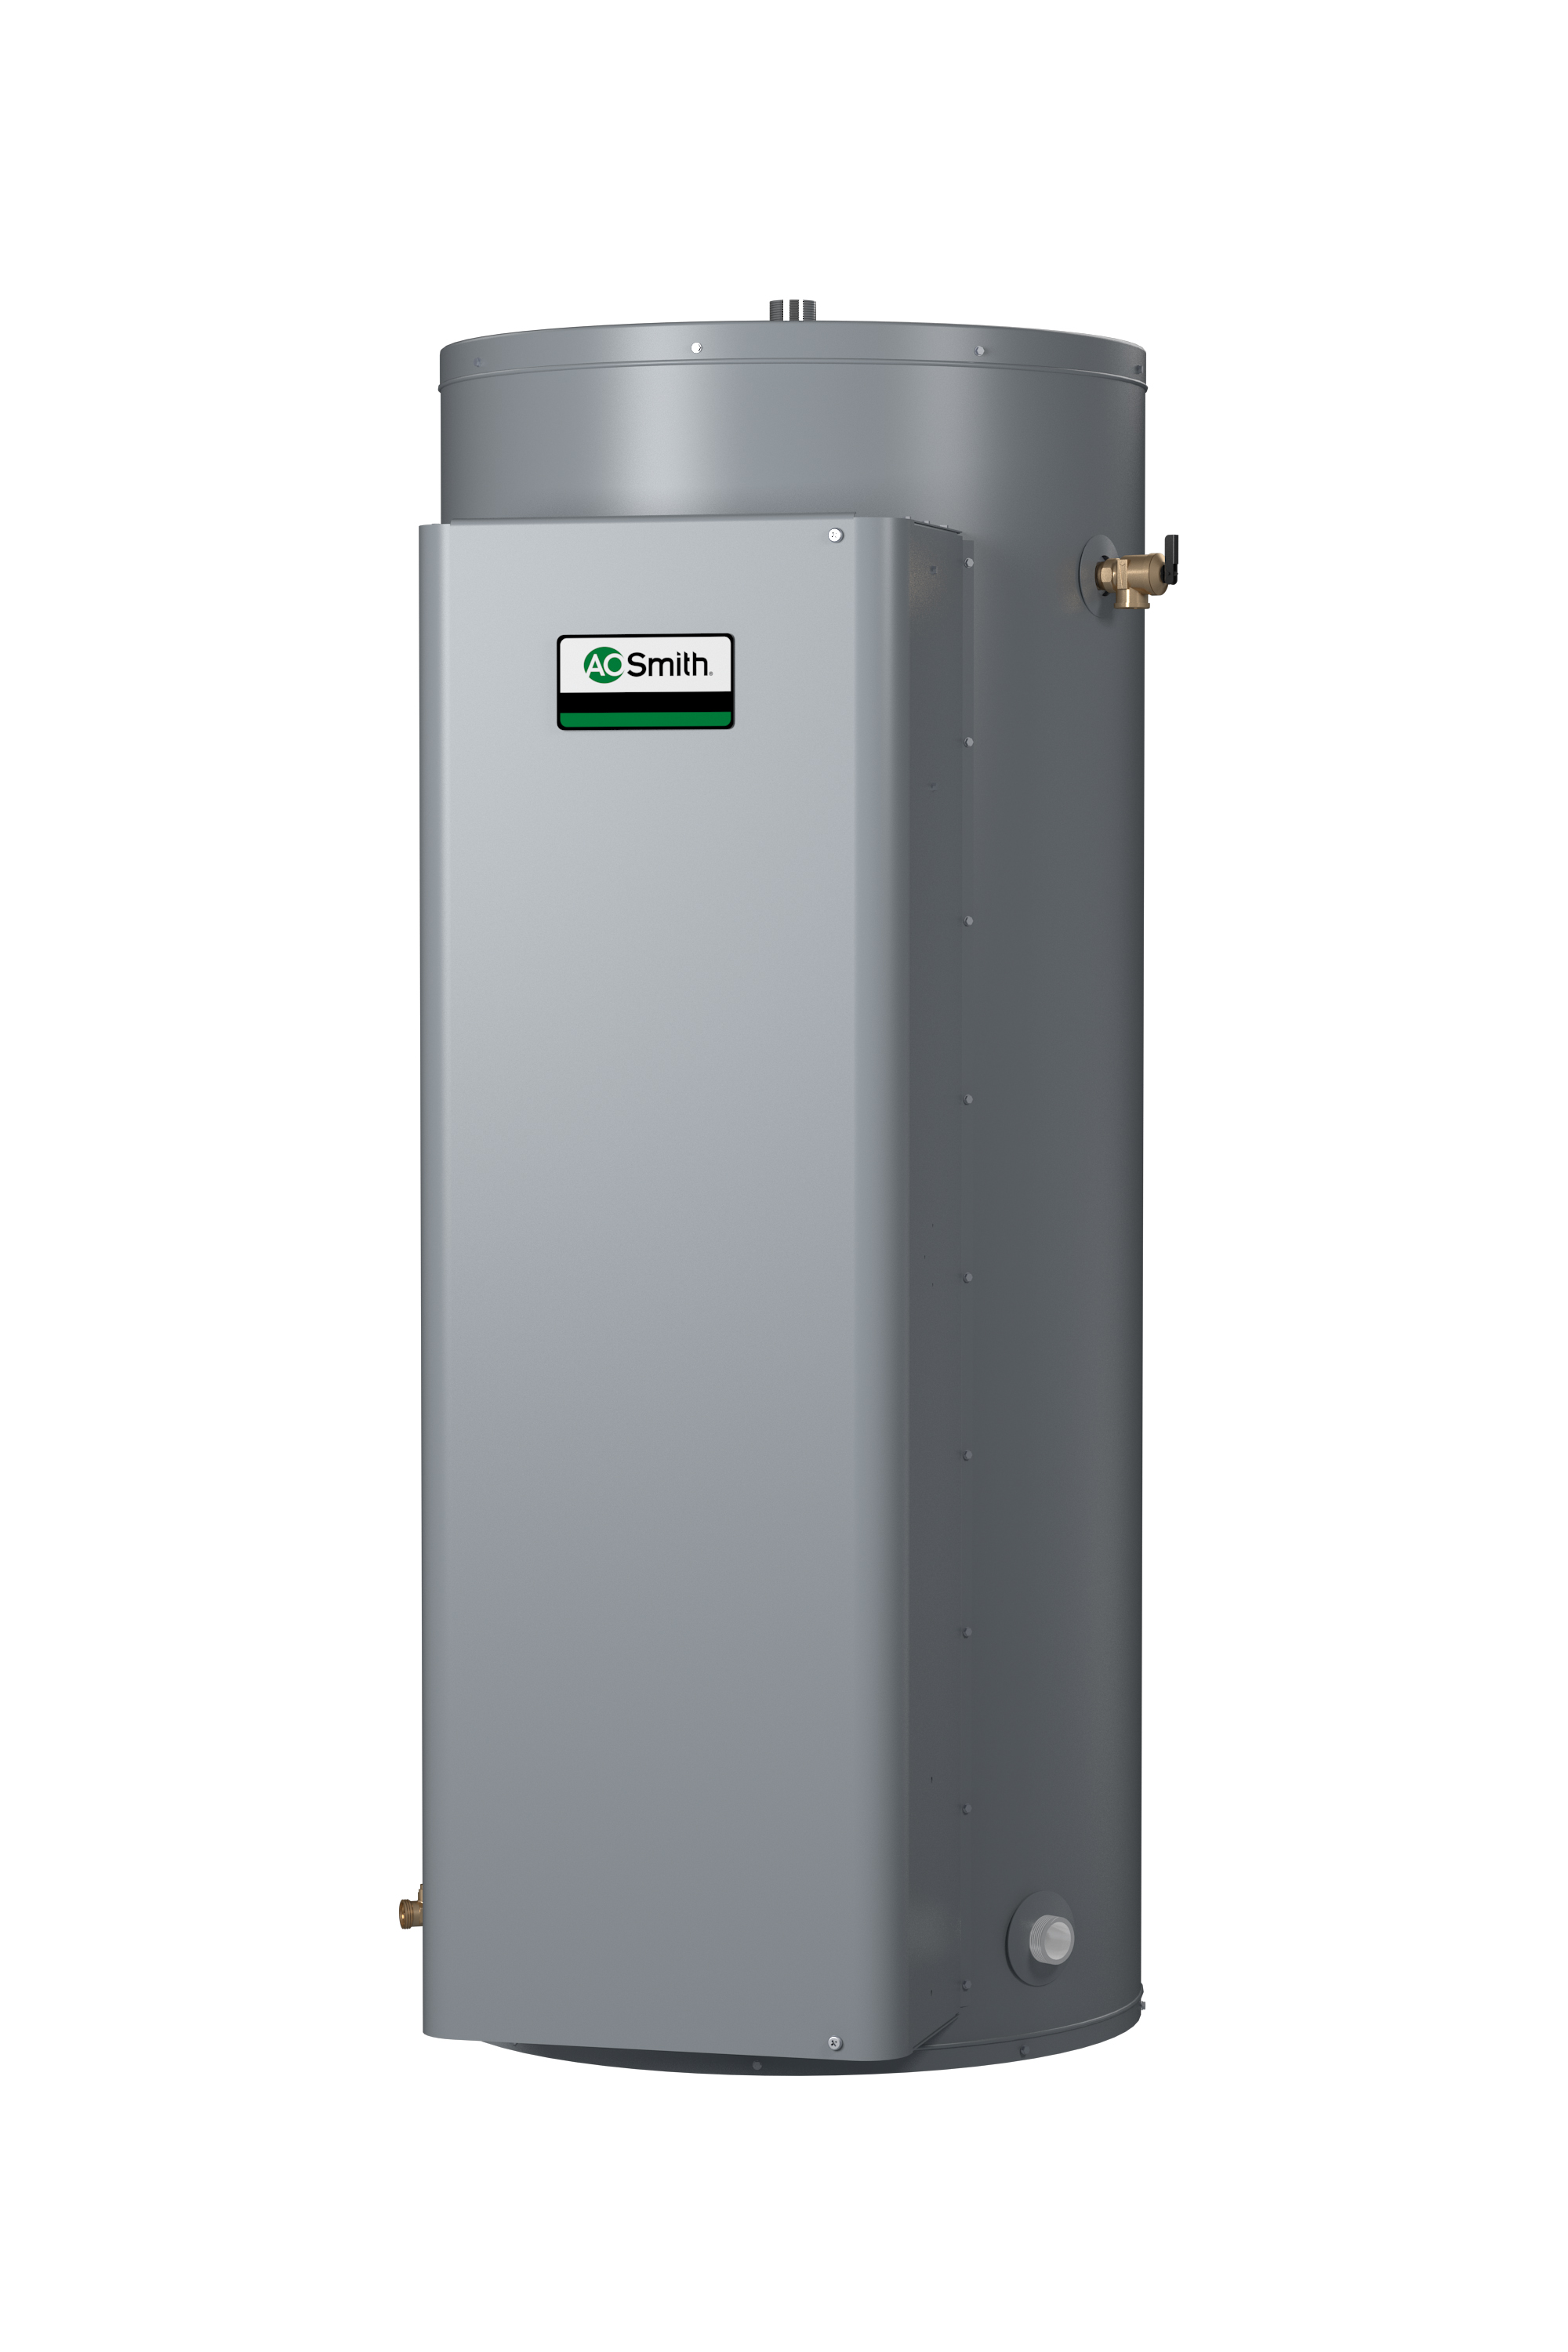 AO SMITH DRE-120-18: 119 GALLON, 18.0KW, 208 VOLT, 86.5 AMPS, 1 PHASE, 6 ELEMENT, COMMERCIAL ELECTRIC WATER HEATER, GOLD SERIES